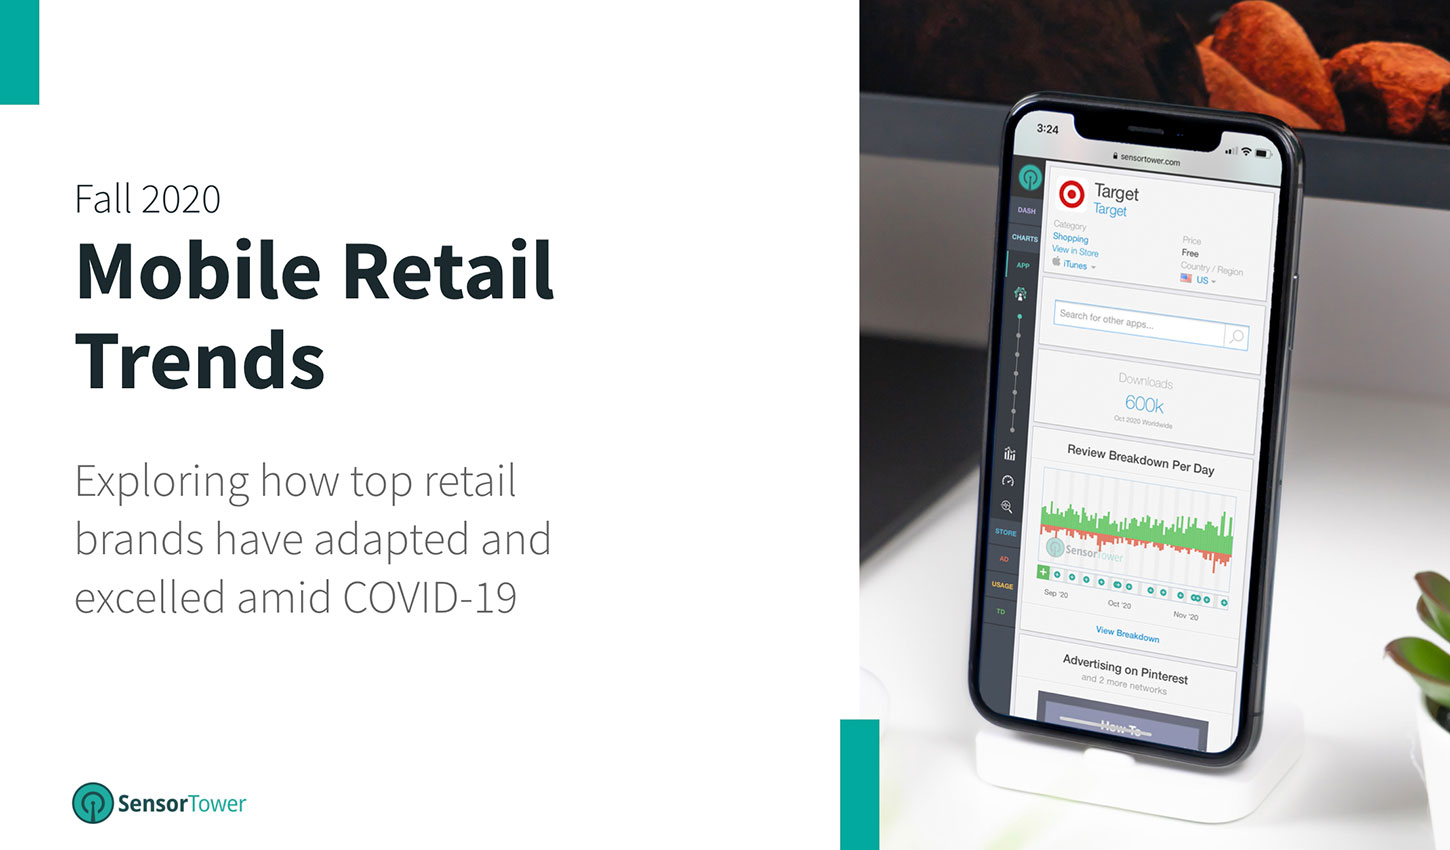 According to Sensor Tower’s Mobile Retail Trends Fall 2020 report, the top B&M apps saw installs grow 27% year-over-year and top e-commerce apps grew 14% year-over-year from Q1 to Q3 2020.”